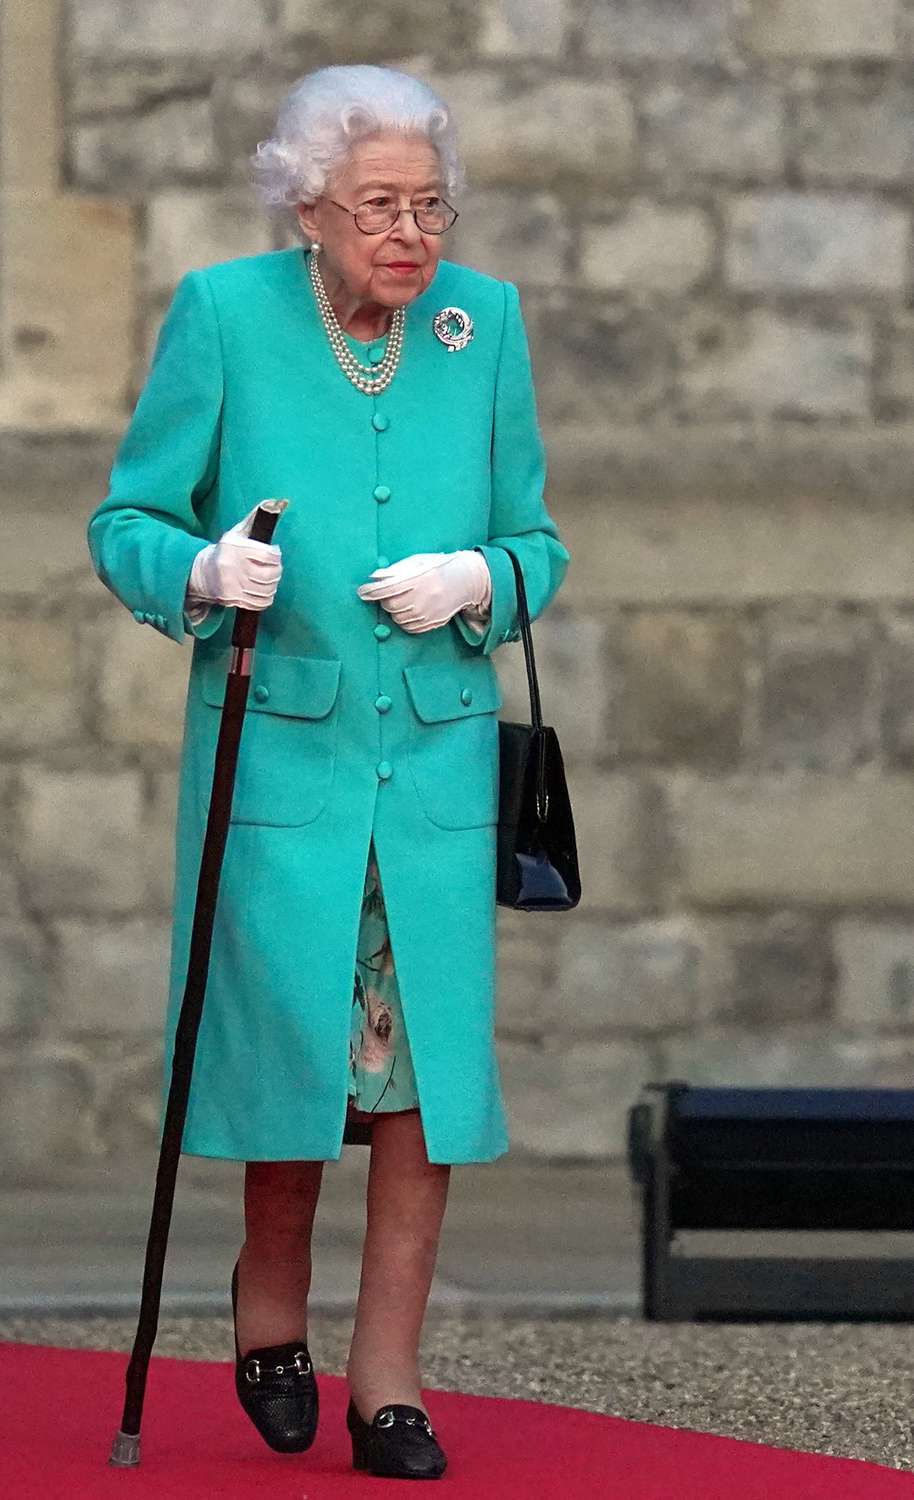 Britain's Queen Elizabeth II arrives to attend a ceremony to start the lighting of the Principal Beacon outside of Buckingham Palace in London, from the Quadrangle at Windsor Castle in Windsor, west of London, on June 2, 2022, as part of Platinum Jubilee celebrations. - The queen will be seen again at Windsor Castle, west of London, as more than 2,800 beacons are lit at Buckingham Palace and across the UK, including atop the four highest peaks, as well as on the Channel Islands, the Isle of Man, and British Overseas Territories. Flaming tributes will be seen in 54 Commonwealth capitals across five continents, from Tonga and Samoa in the South Pacific to Belize in the Caribbean.